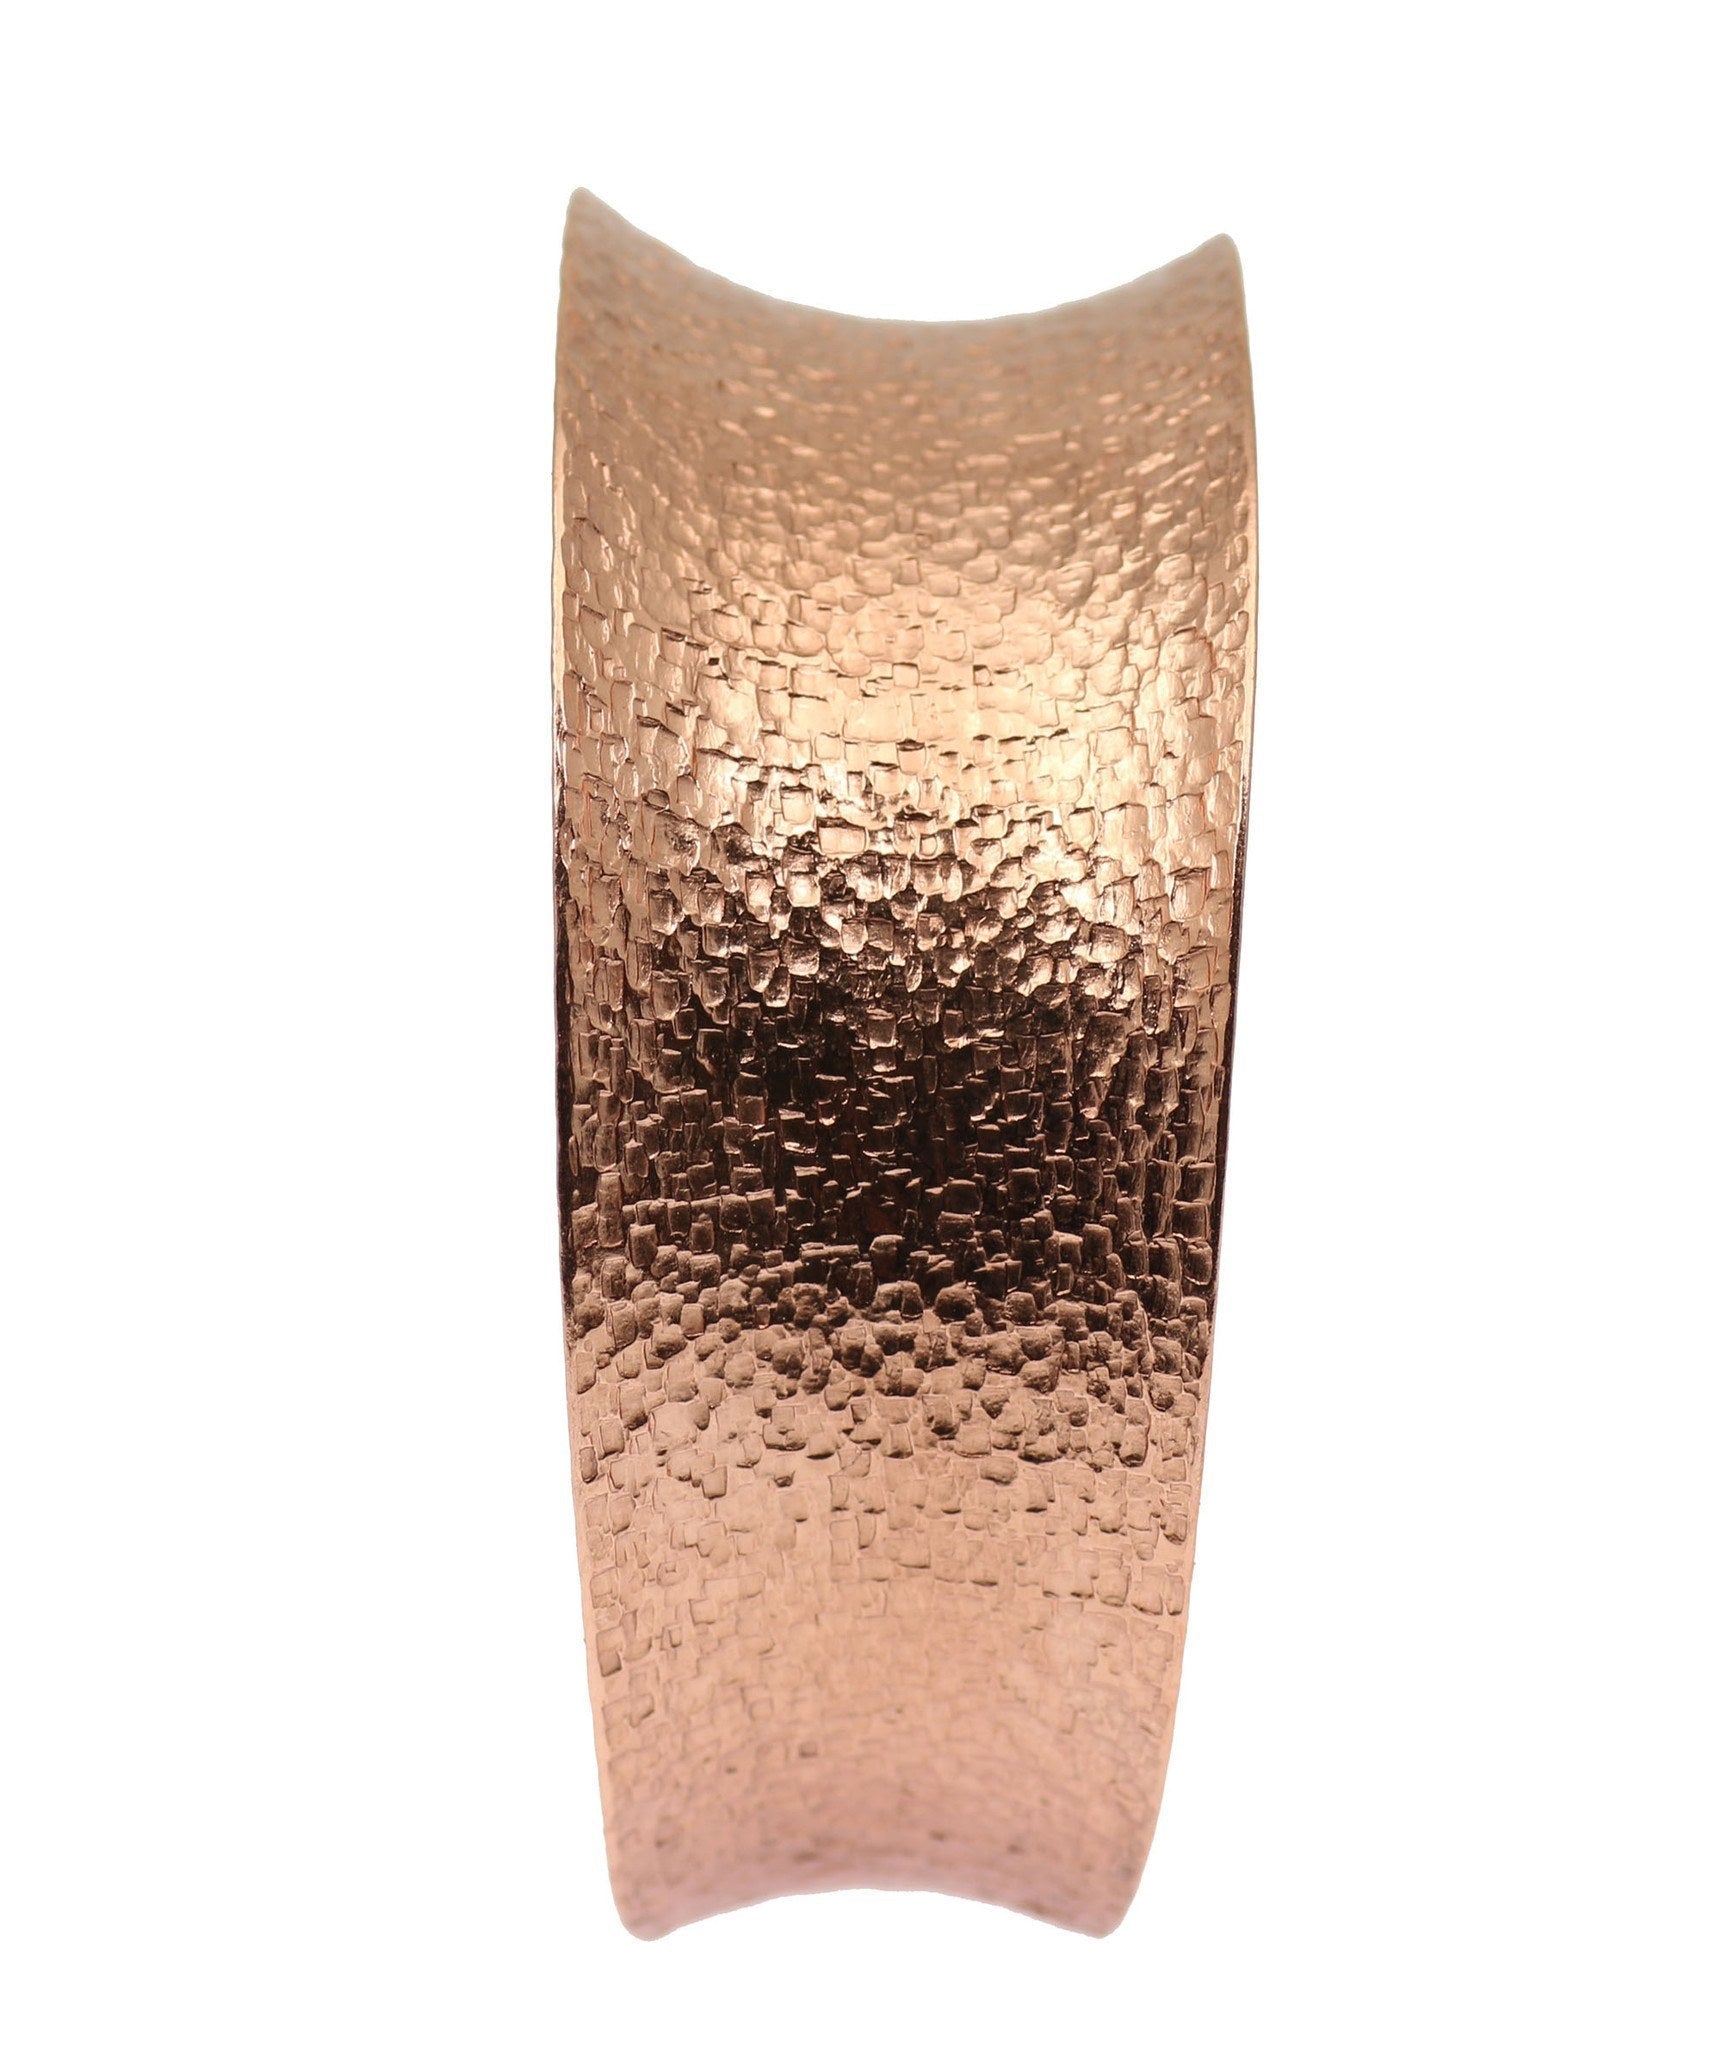 Side View of Texturized Copper Bangle Bracelet